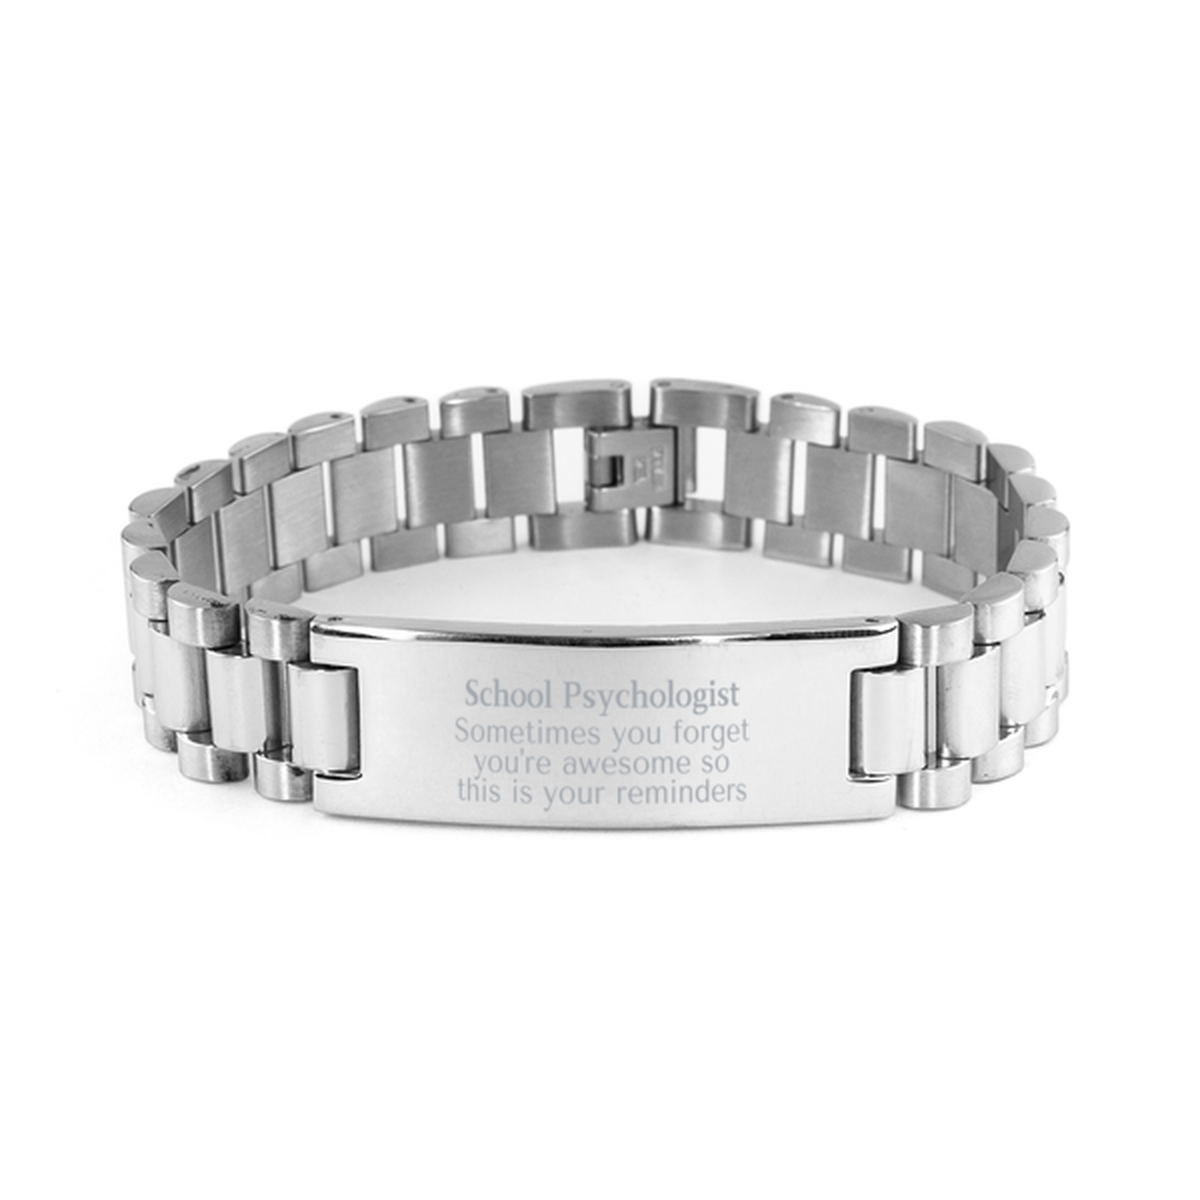 Sentimental School Psychologist Ladder Stainless Steel Bracelet, School Psychologist Sometimes you forget you're awesome so this is your reminders, Graduation Christmas Birthday Gifts for School Psychologist, Men, Women, Coworkers